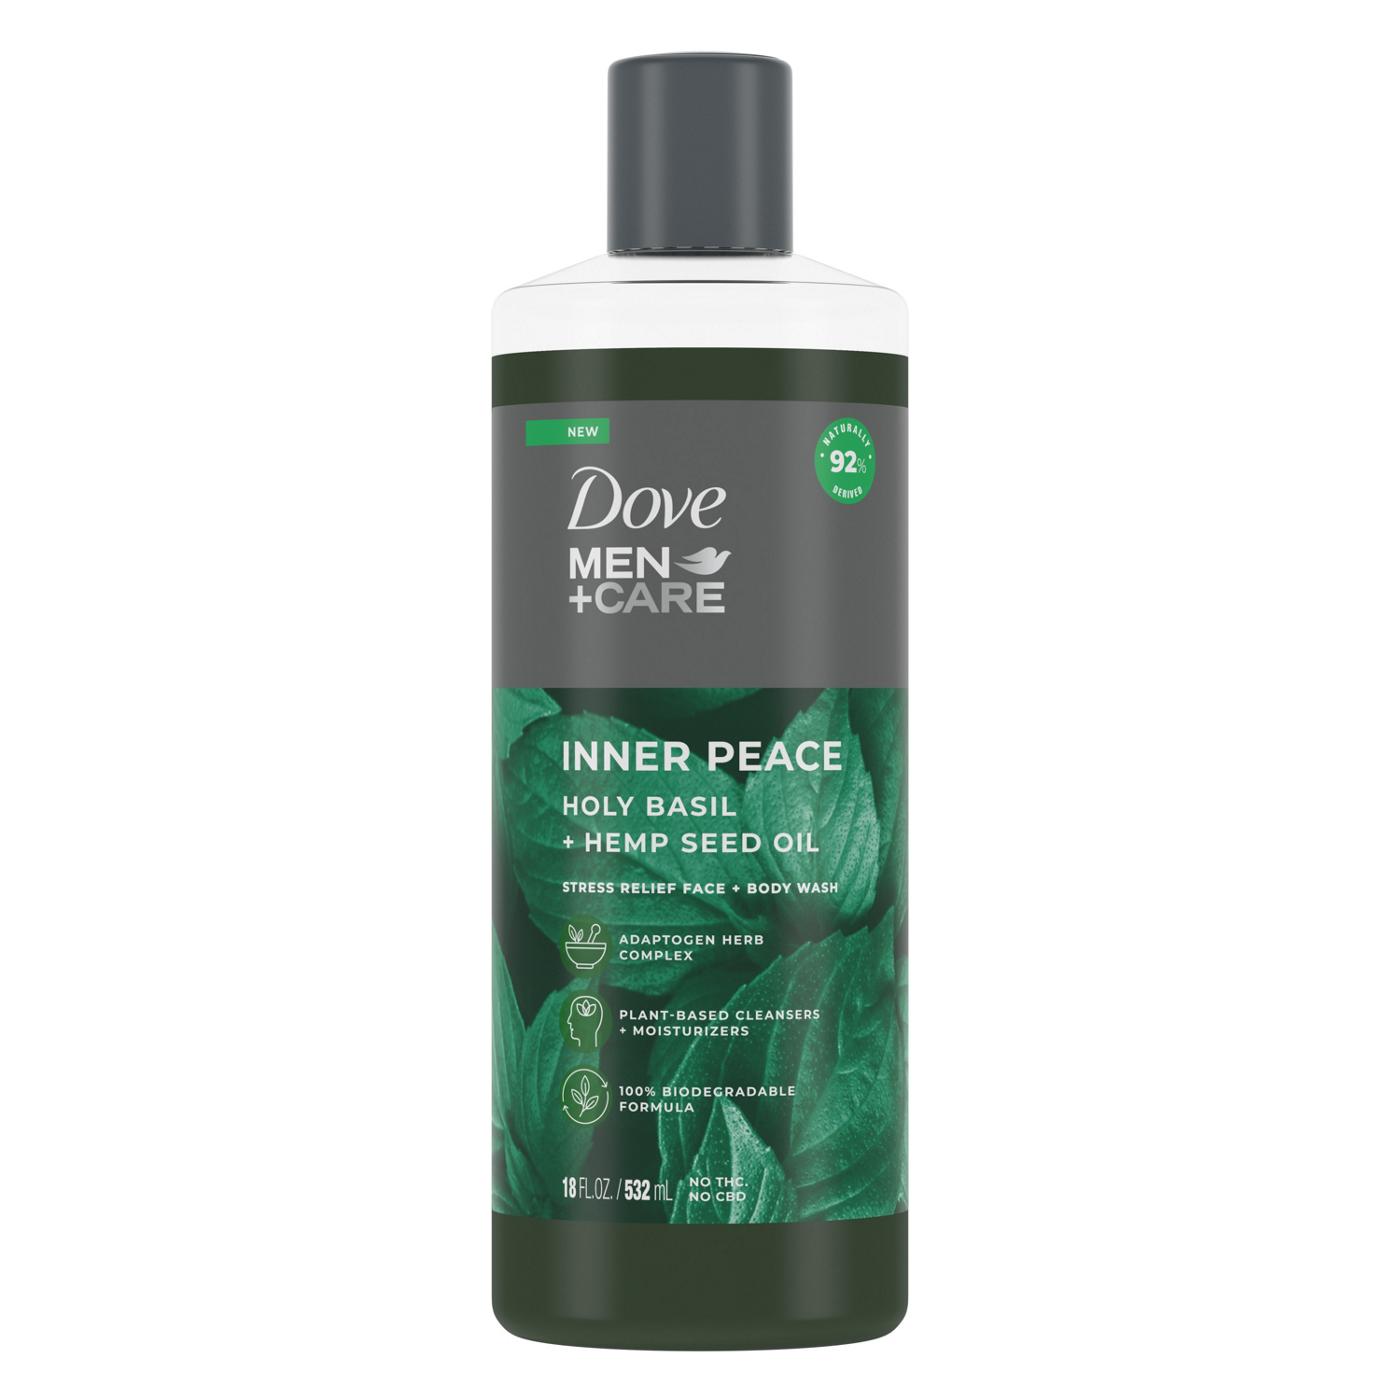 Dove Men+Care Stress Relief Face + Body Wash - Holy Basil + Hemp Seed Oil; image 1 of 3